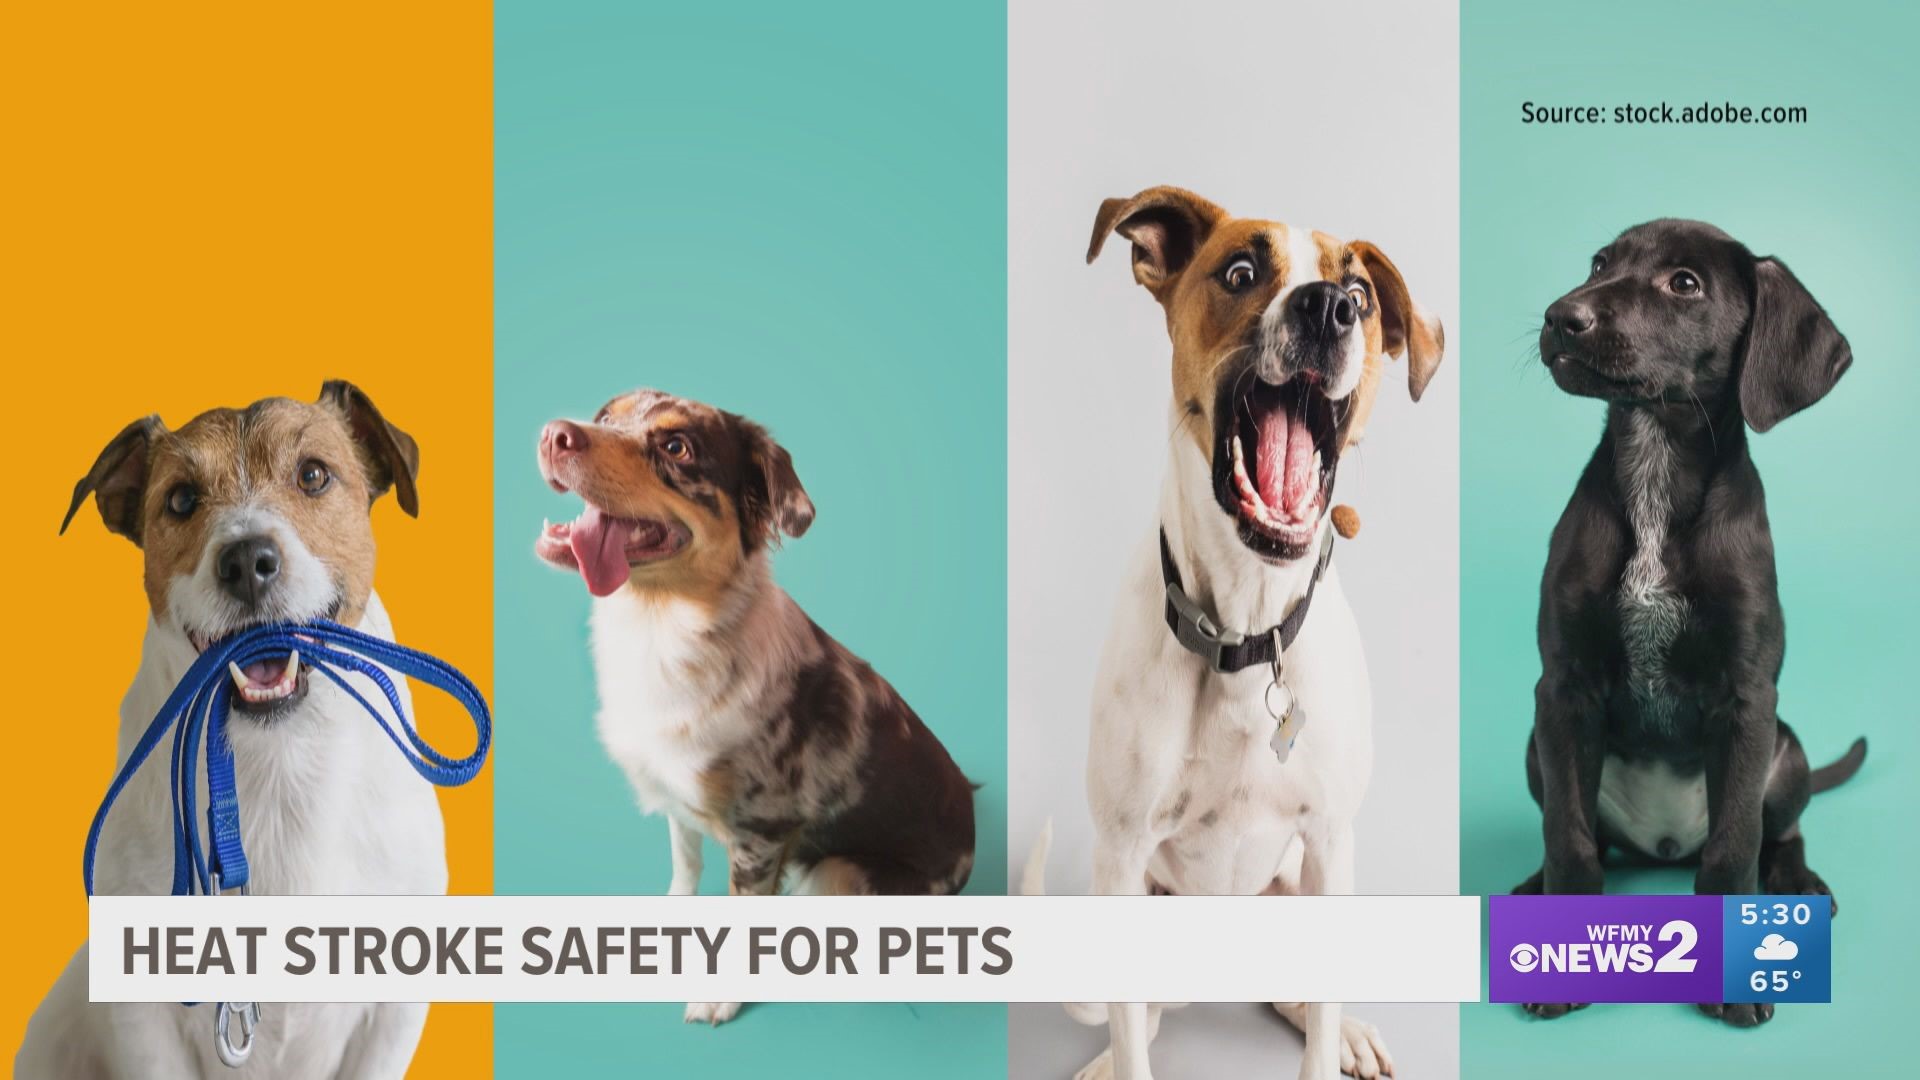 If your pet is experiencing heat stroke or was recently bitten by a snake, it is important that you act fast.